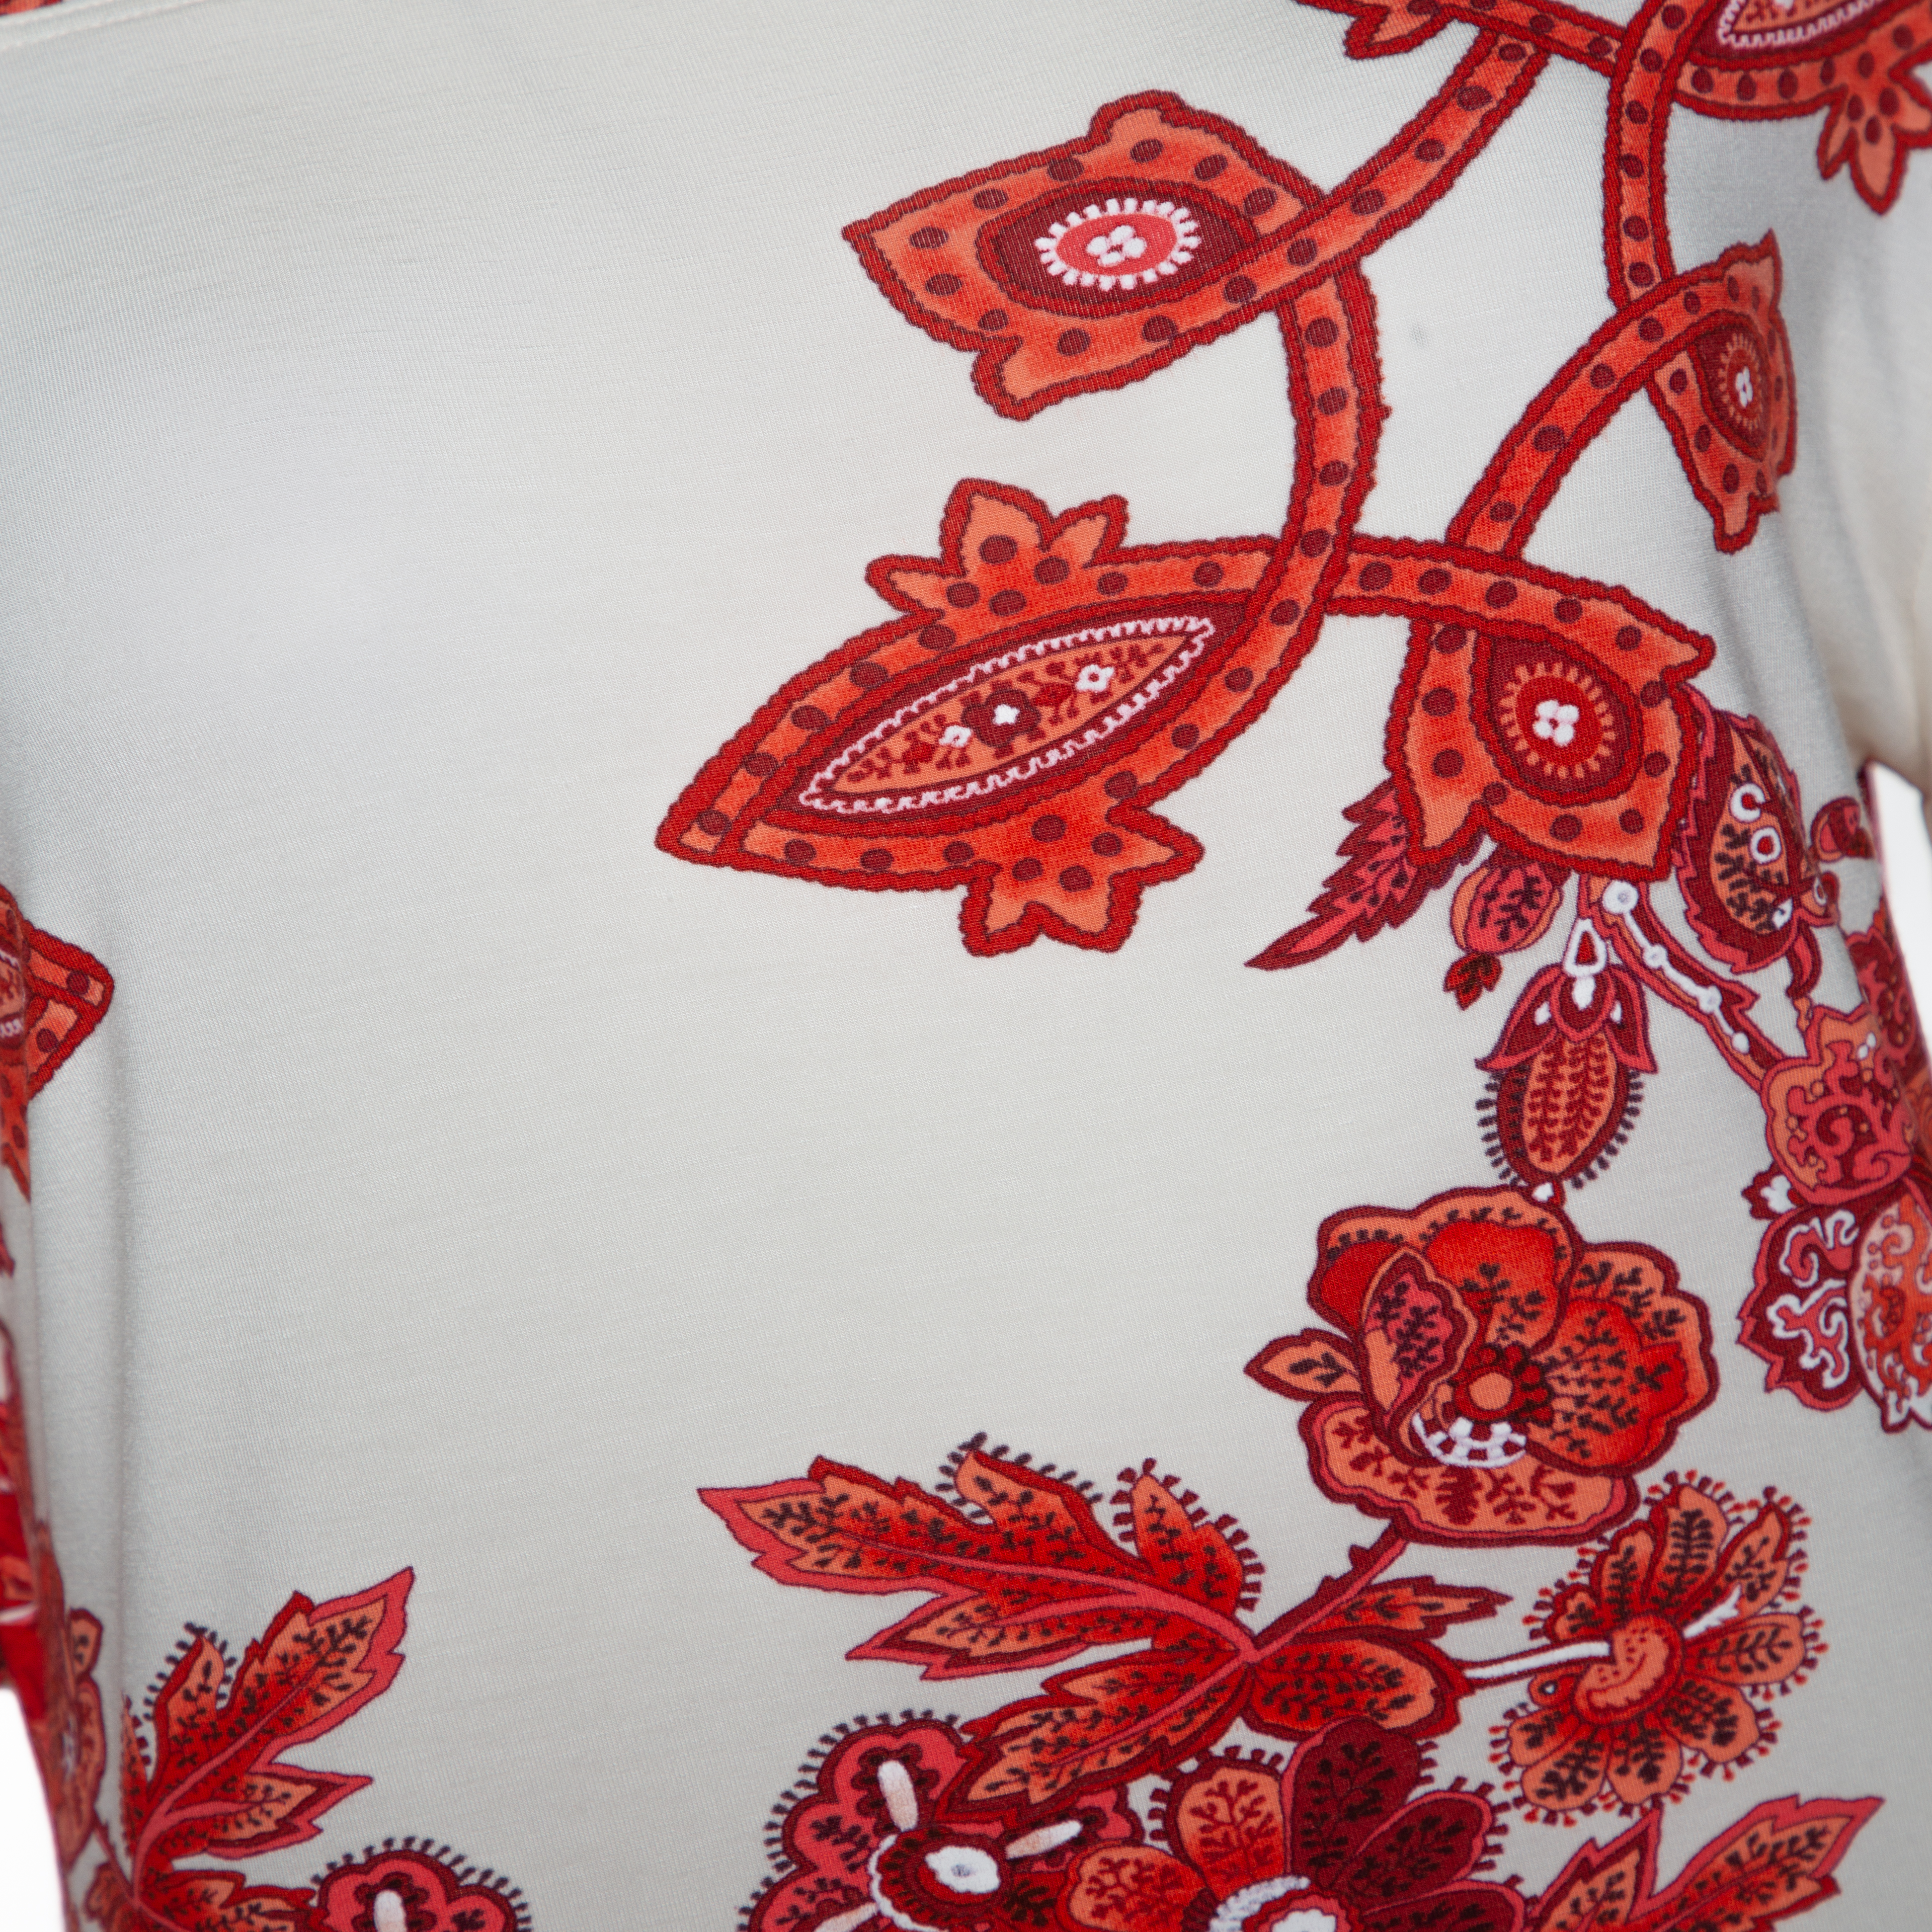 Roberto Cavalli White And Red Floral Print Off Shoulder Top L